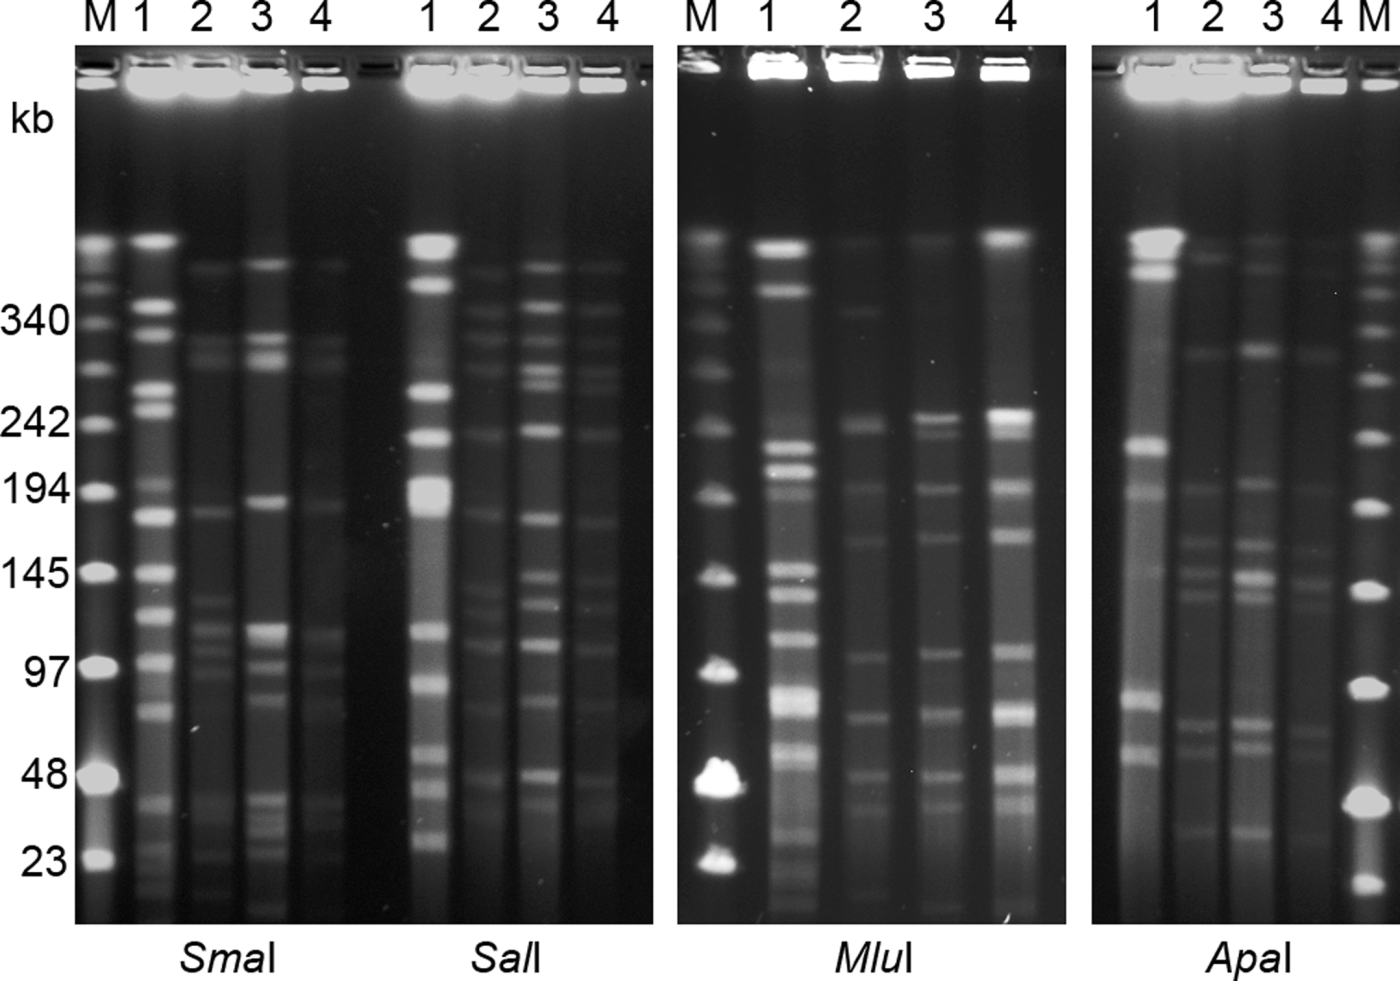 Figure 2.  PFGE separation of macrorestriction digests of four avian C. botulinum type C strains using restriction enzymes SmaI, SalI, ApaI and MluI. Lane 1, strain 07-BKT002873; lane 2, 07-V891; lane 3, 07-BKT028387; and lane 4, 08-BKT015925. The outermost lanes contain a low range PFG marker (M). The pulse time was ramped from 1 to 40 s for 30 h at 4 V/cm.